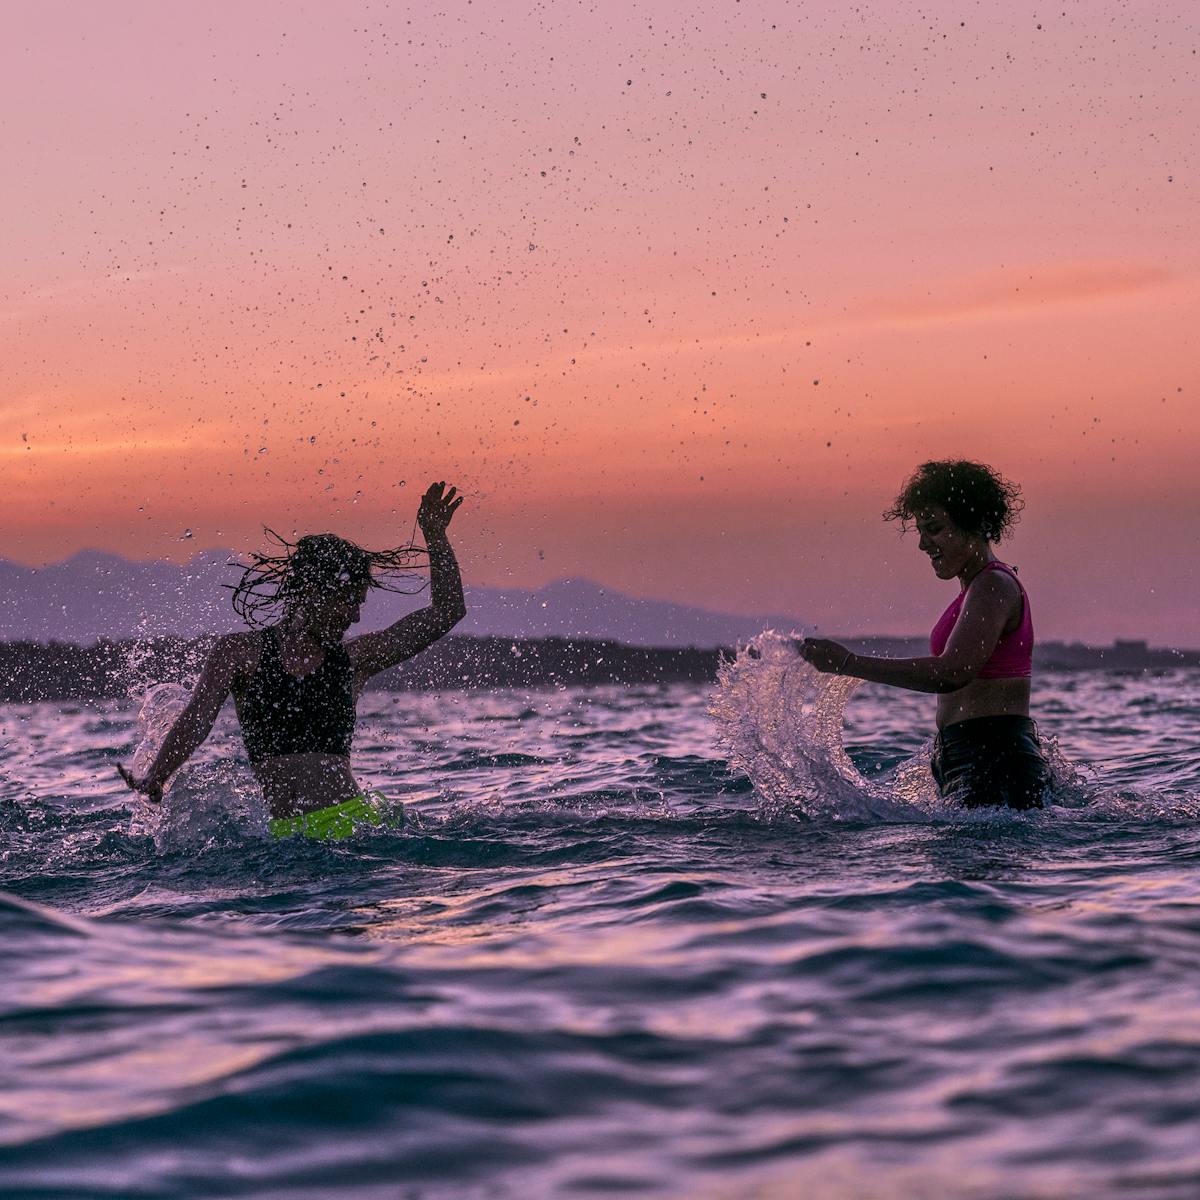 Manal and Nathalie Issa play in the water, lit by a pink and orange sunset.